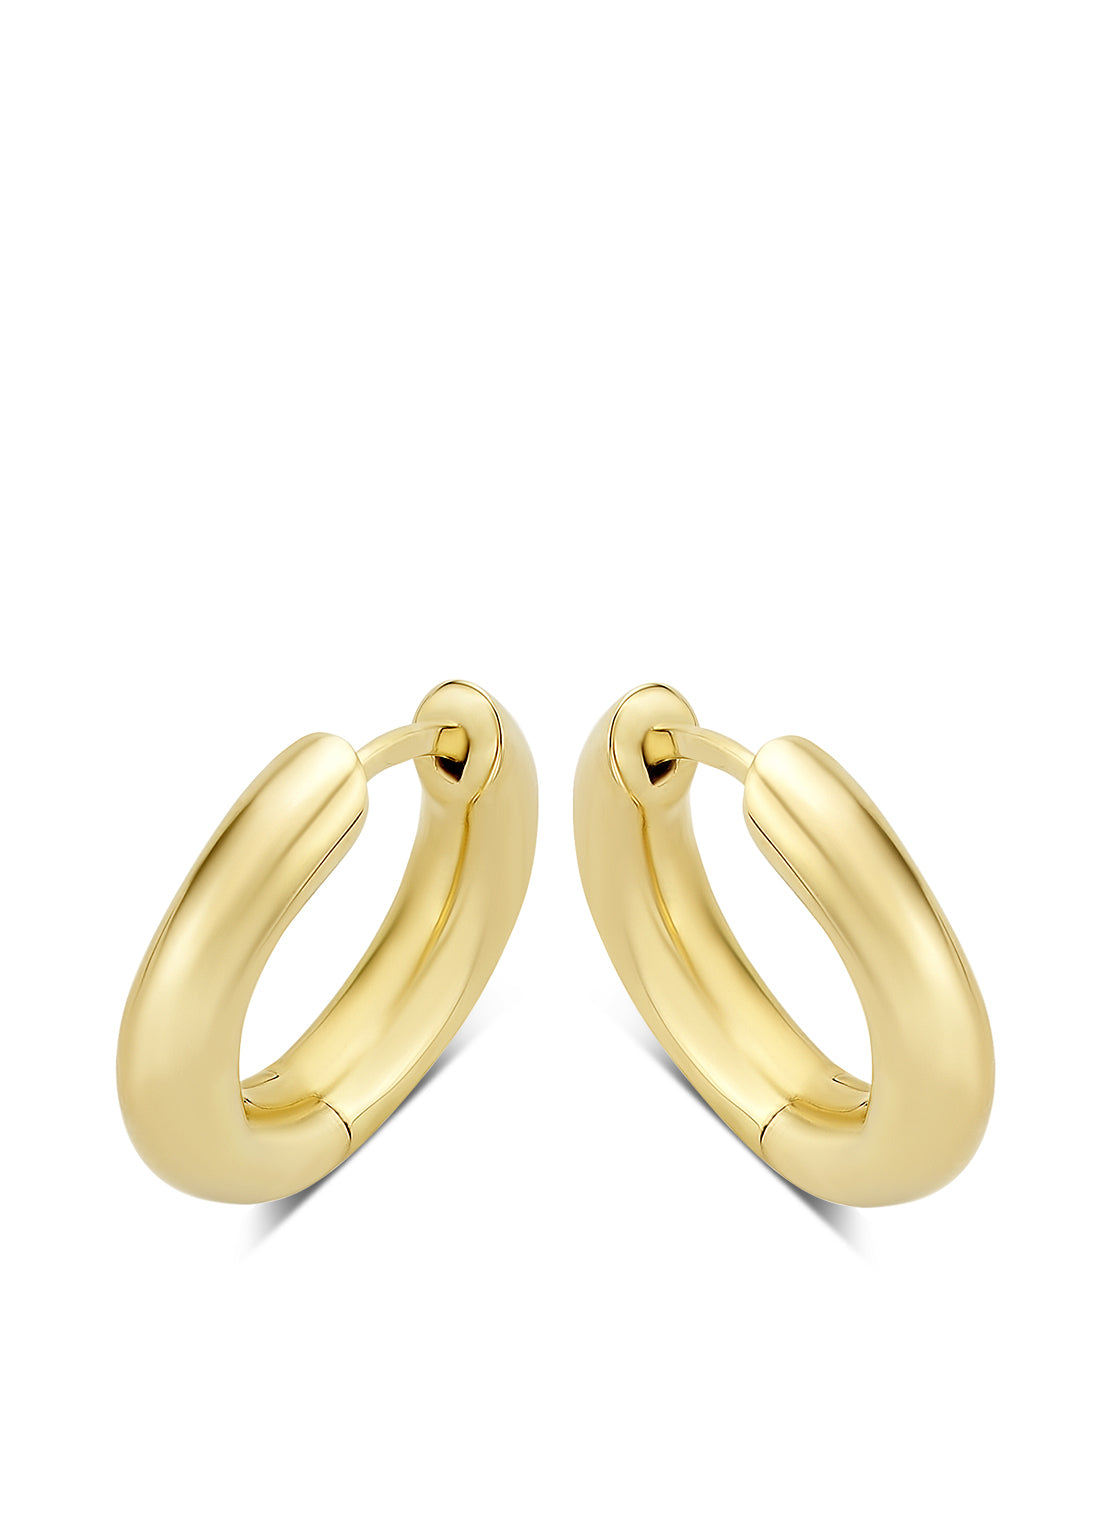 Yellow gold earrings timeless treasures m